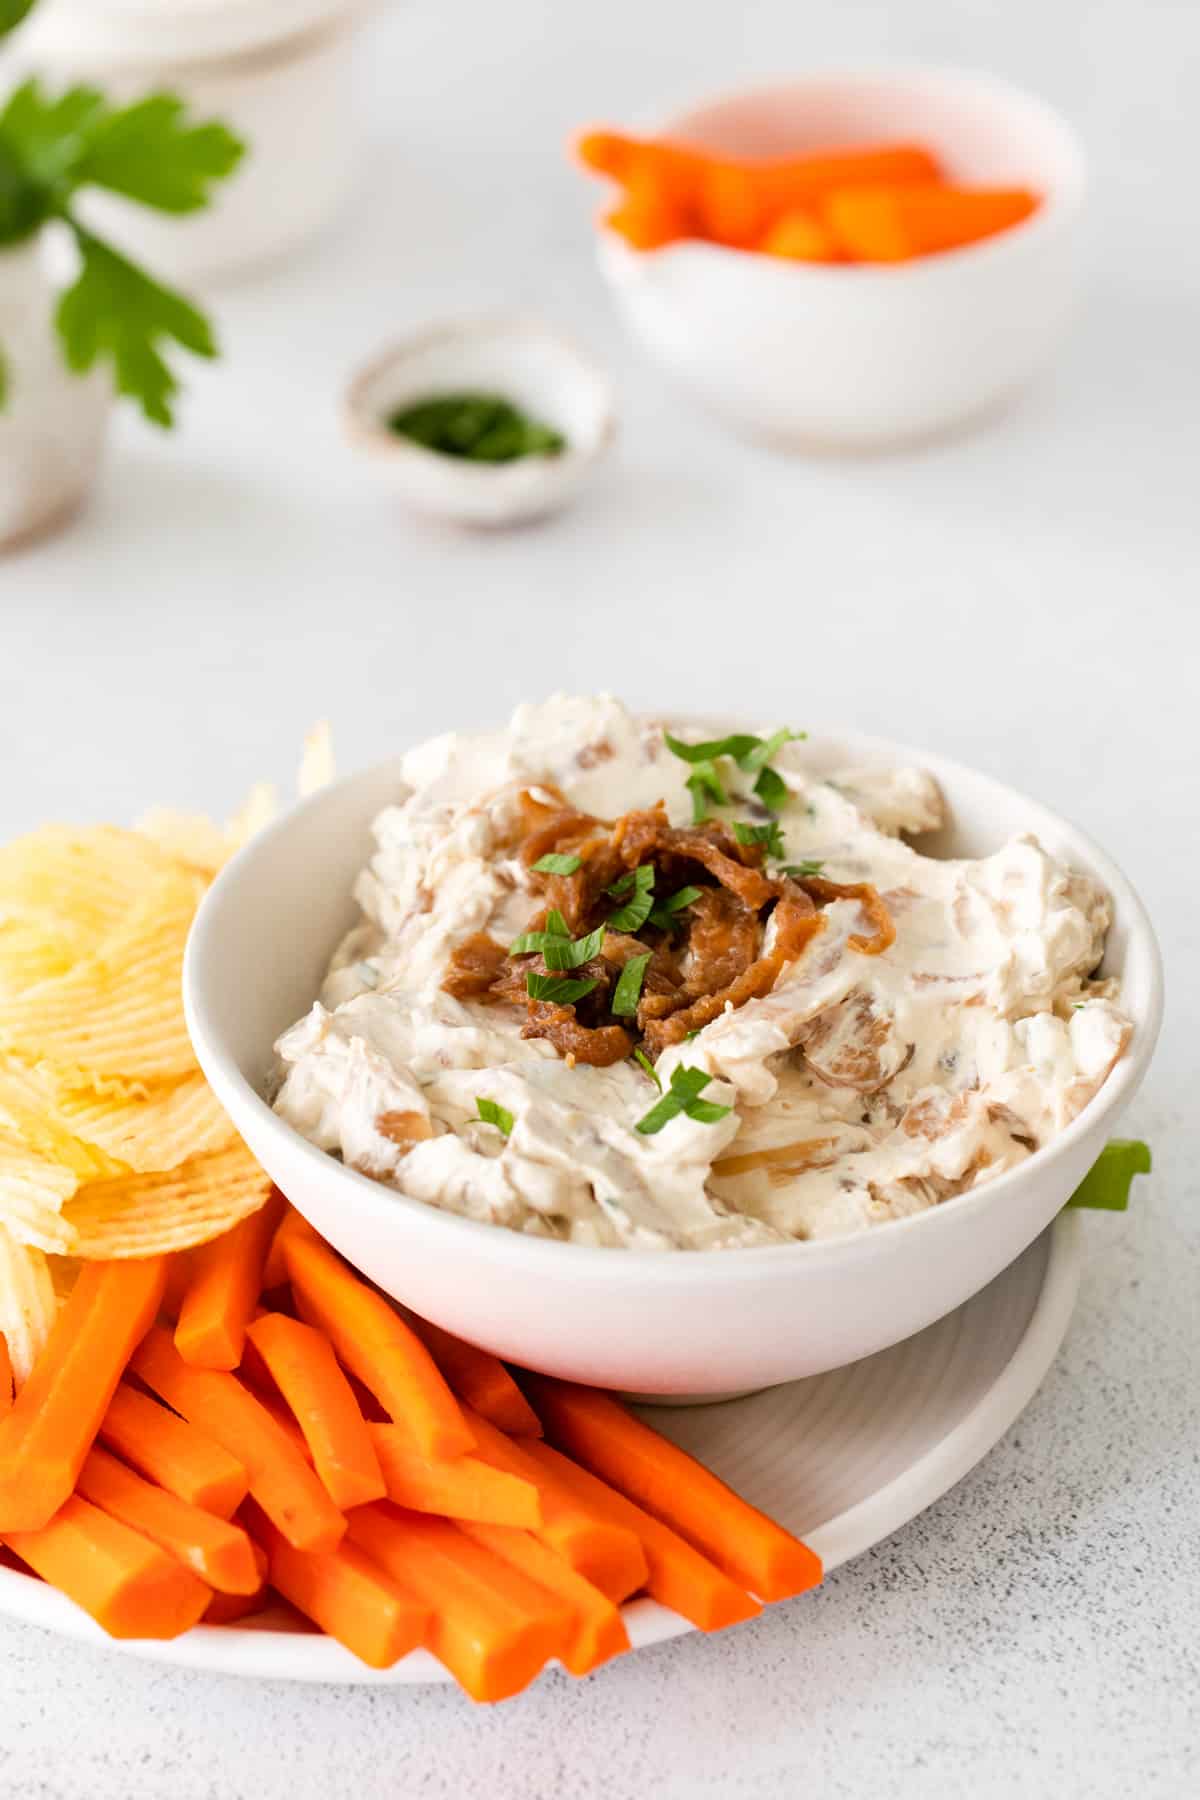 french onion dip in a white bowl on a serving platter surrounded by chips, celery sticks, and carrot sticks